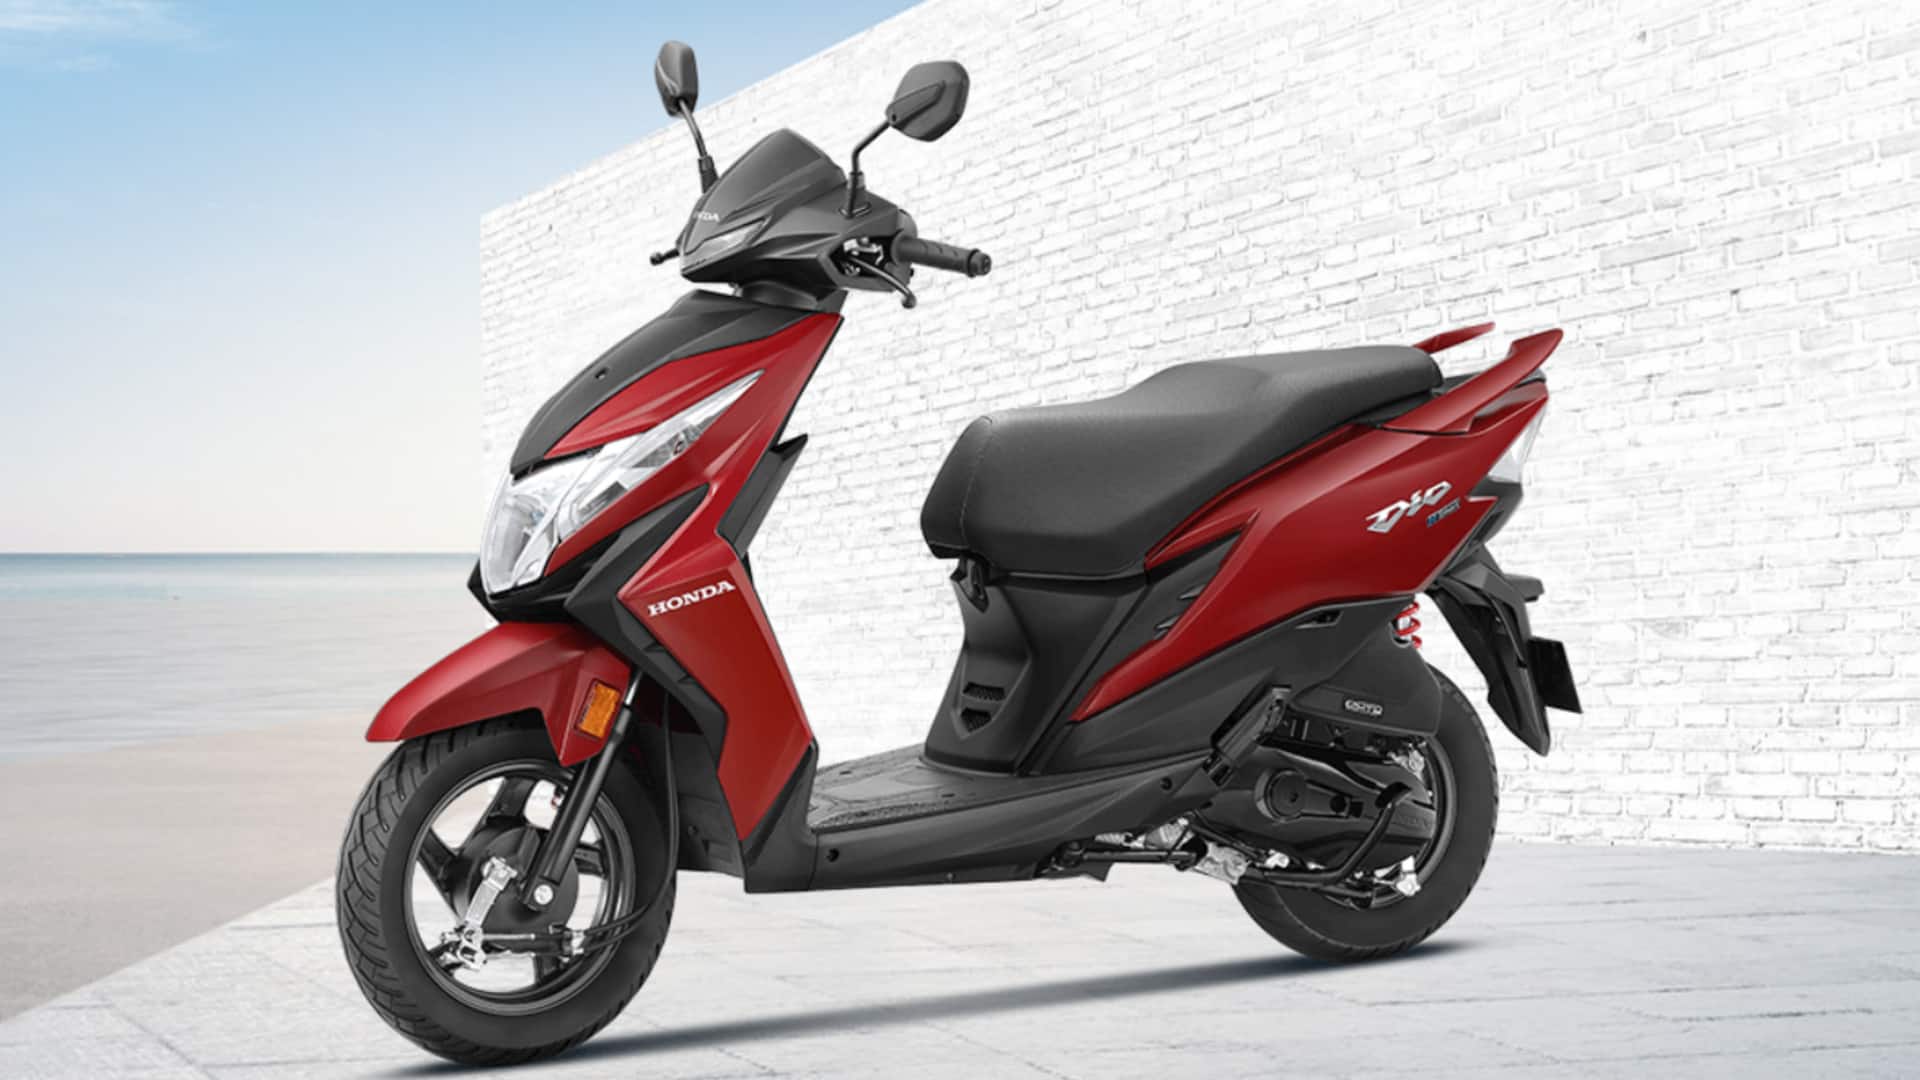 Honda Dio 125 with H-Smart technology goes official: Check prices